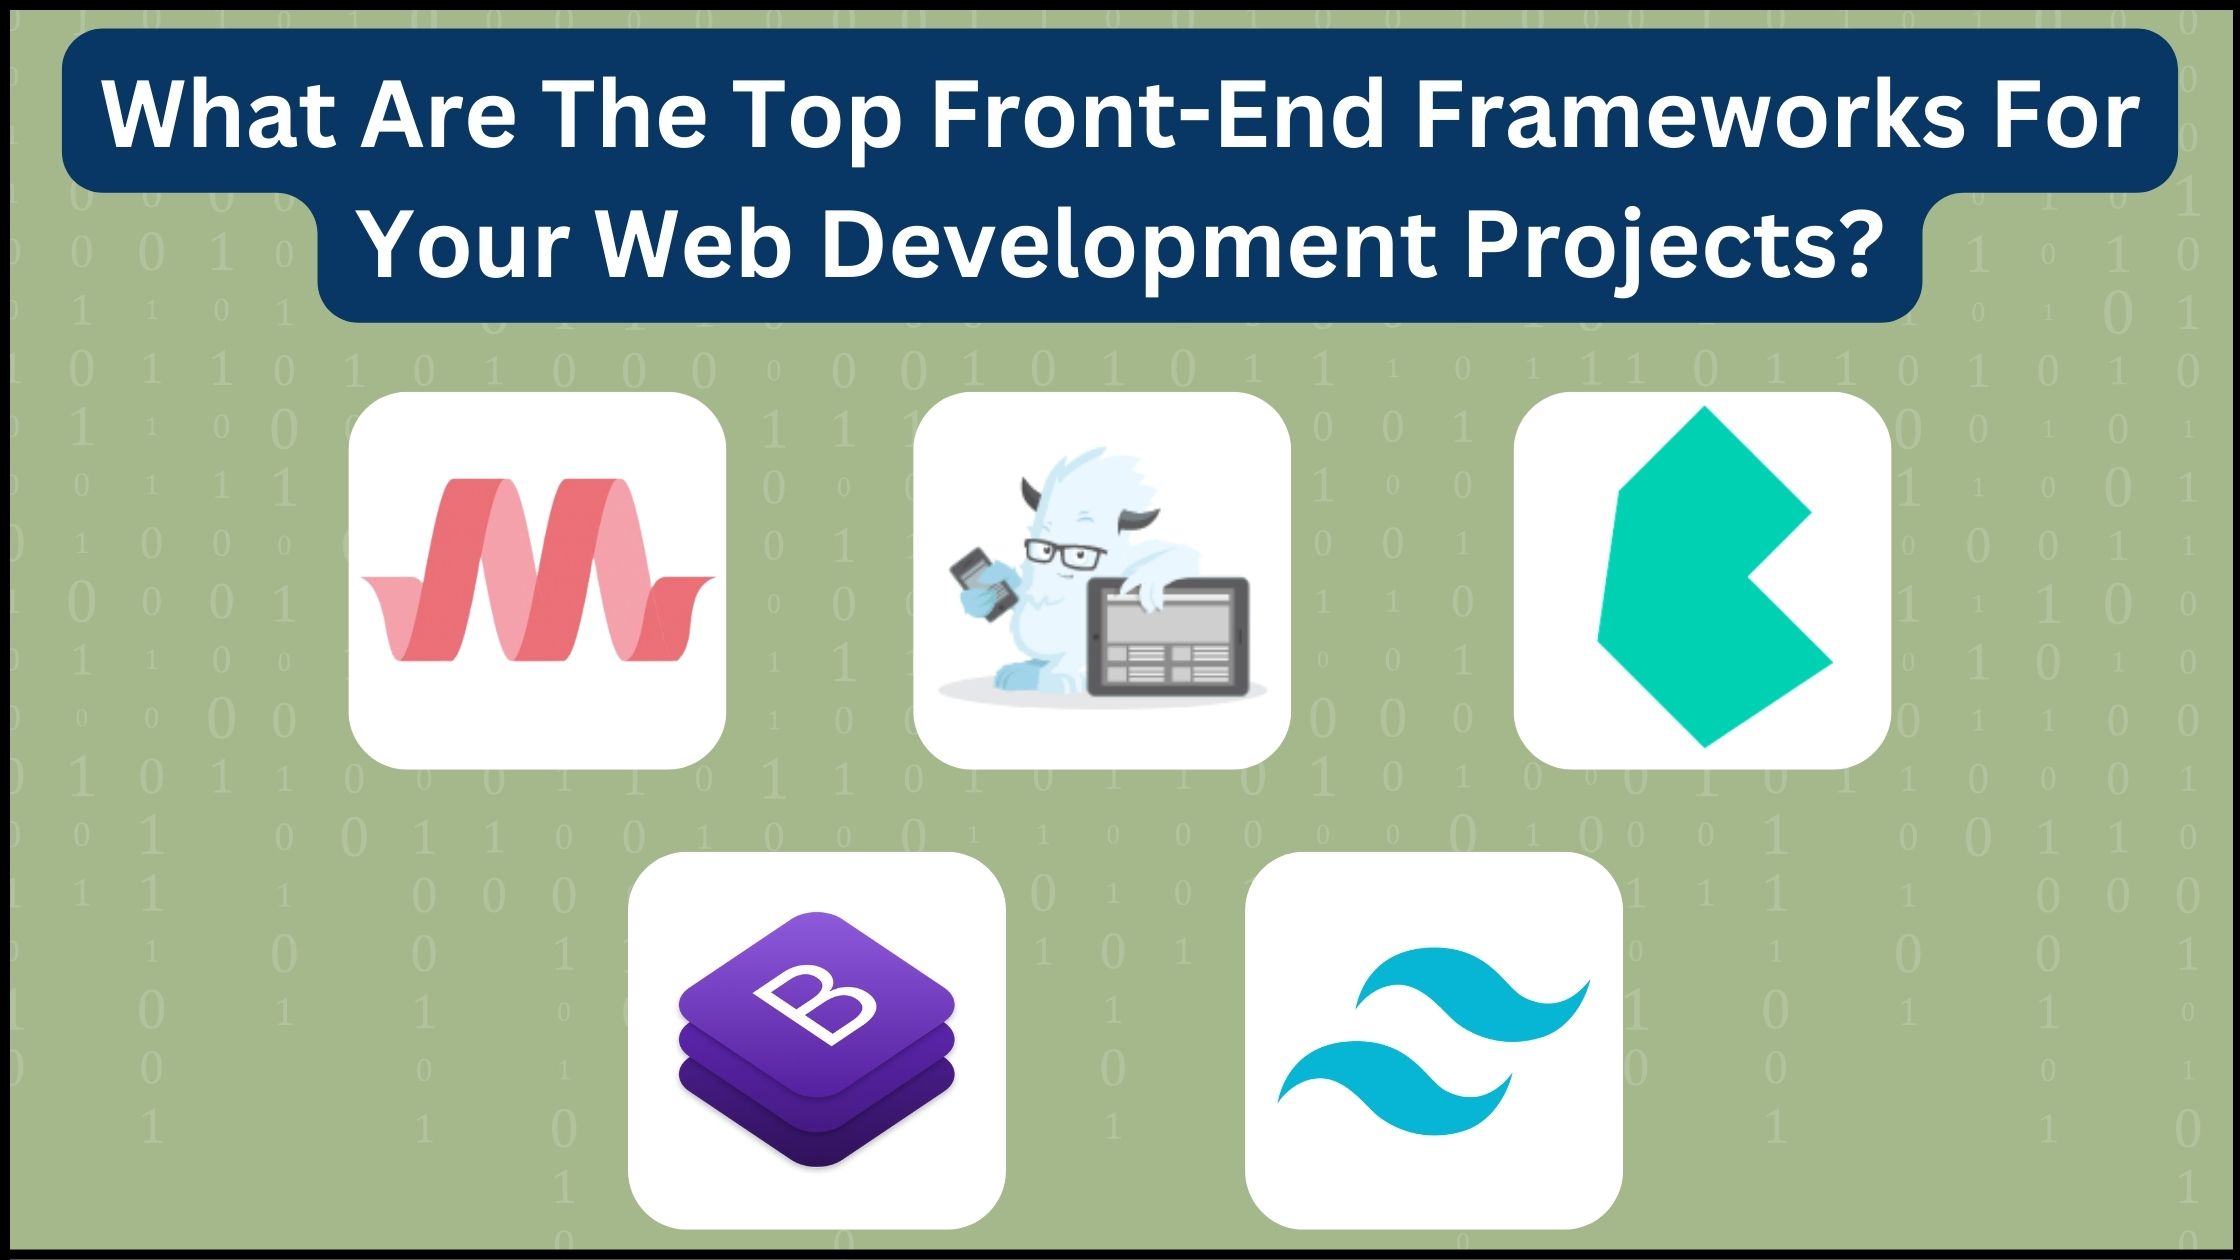 What Are The Top Front-End Frameworks For Your Web Development Projects